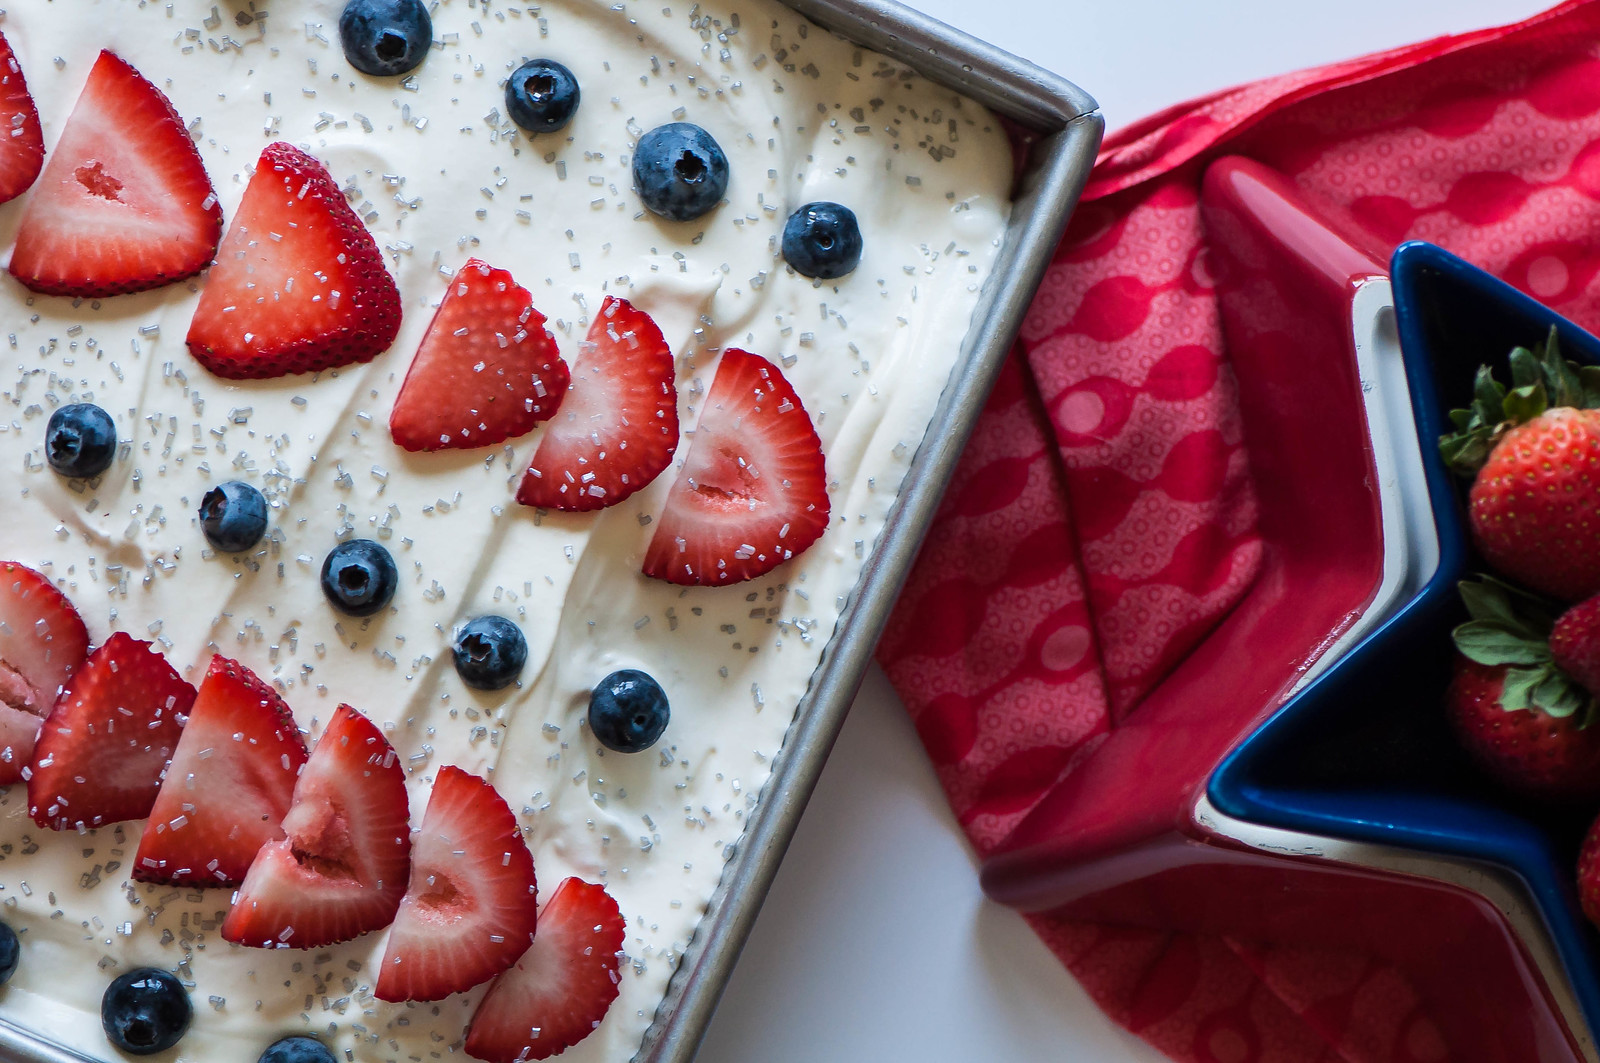 Keep things festive with this 4th of July Poke Cake. It’s simple to prepare, starting with a cake mix, and will definitely steal the show.